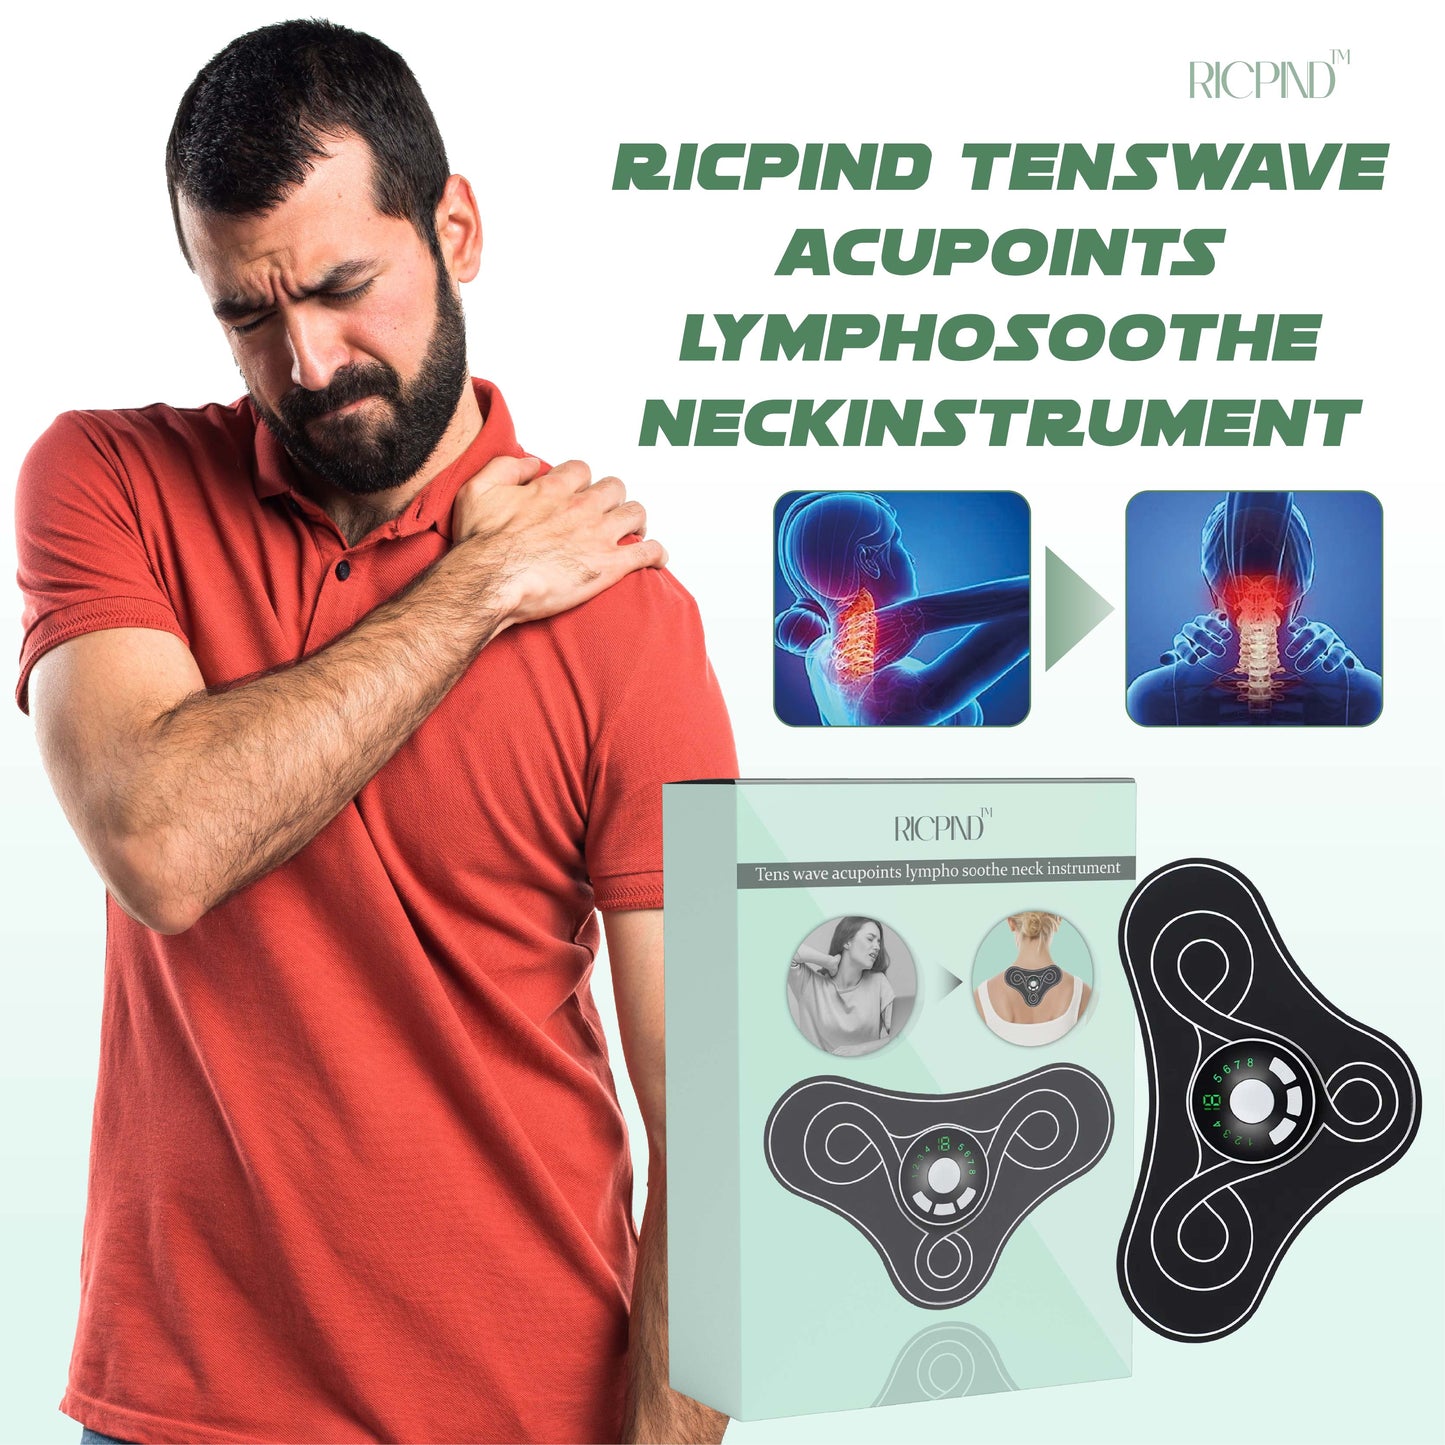 RICPIND TENSWave Acupoints LymphoSoothe NeckInstrument